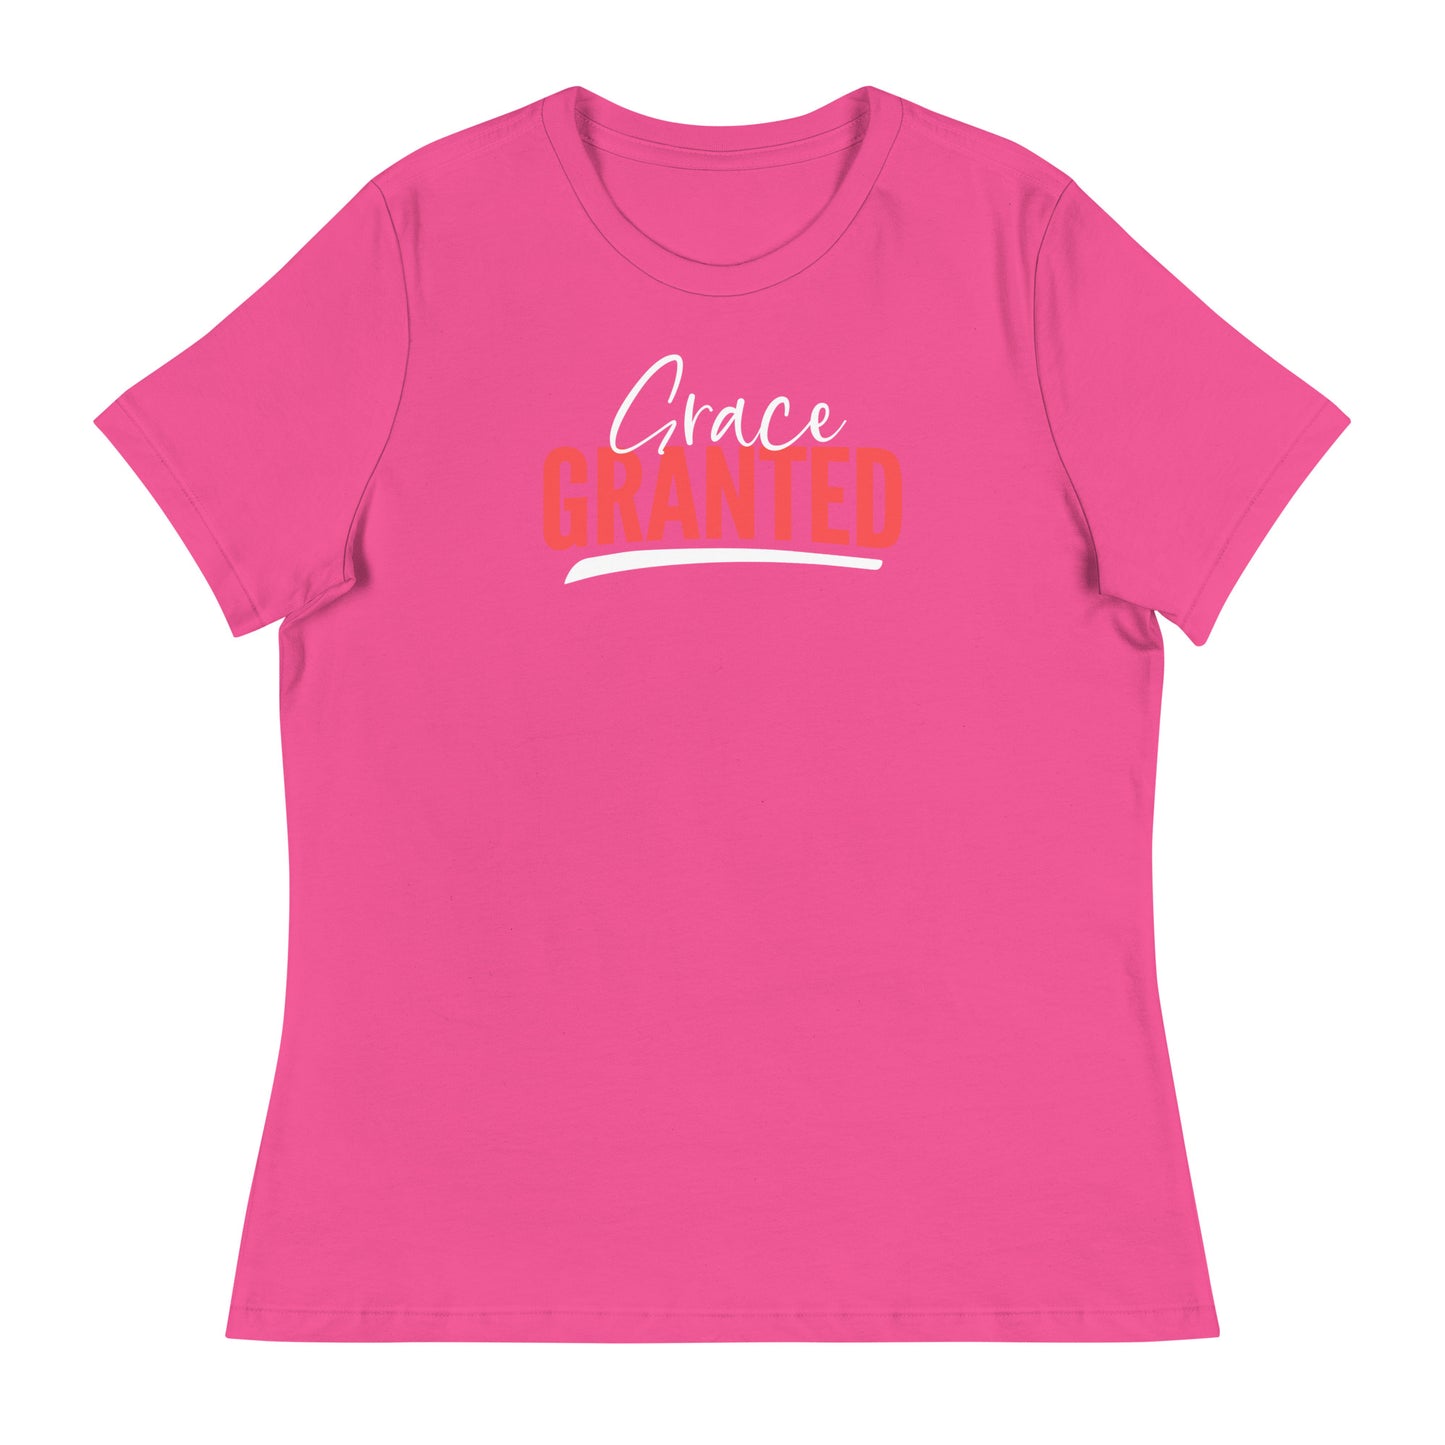 Grace Granted - Women's Relaxed T-Shirt